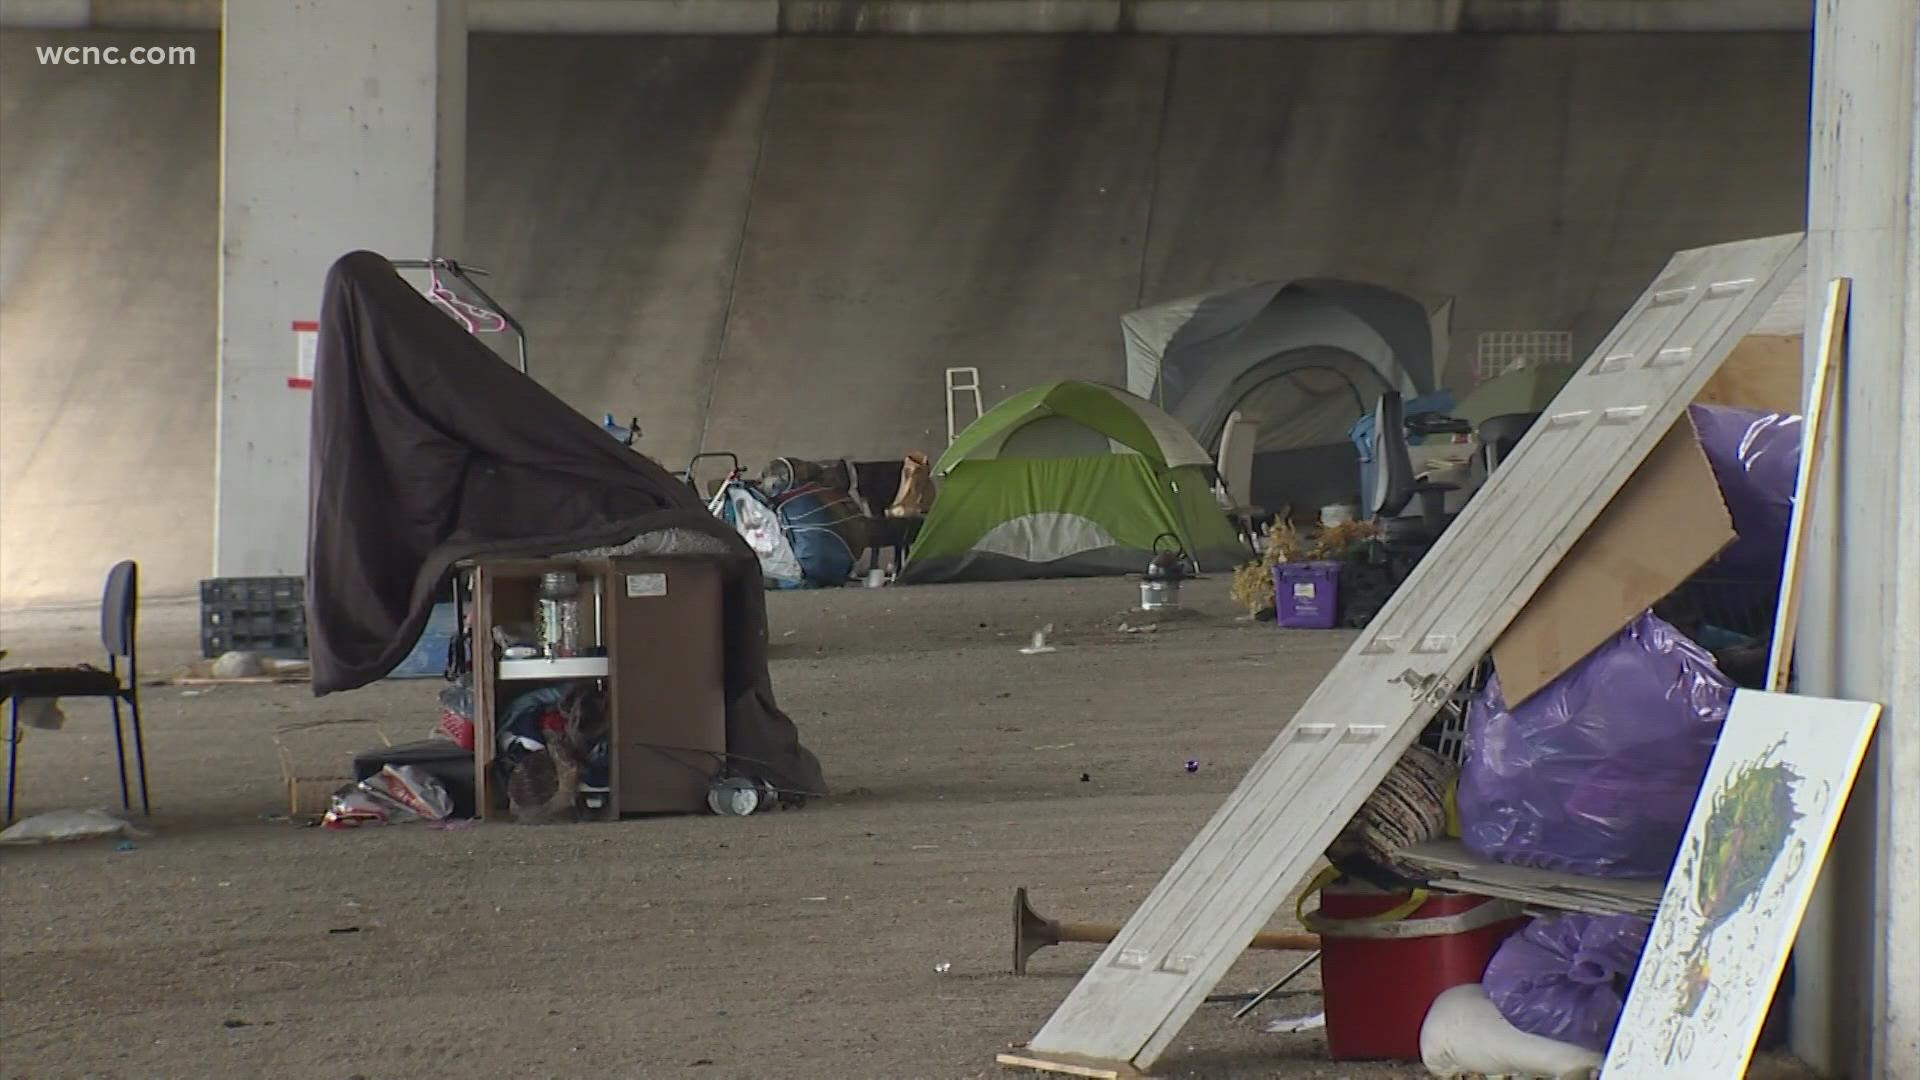 Mecklenburg County released its report on homelessness in the area this week, and it highlighted just how much COVID-19 has had an impact on residents.